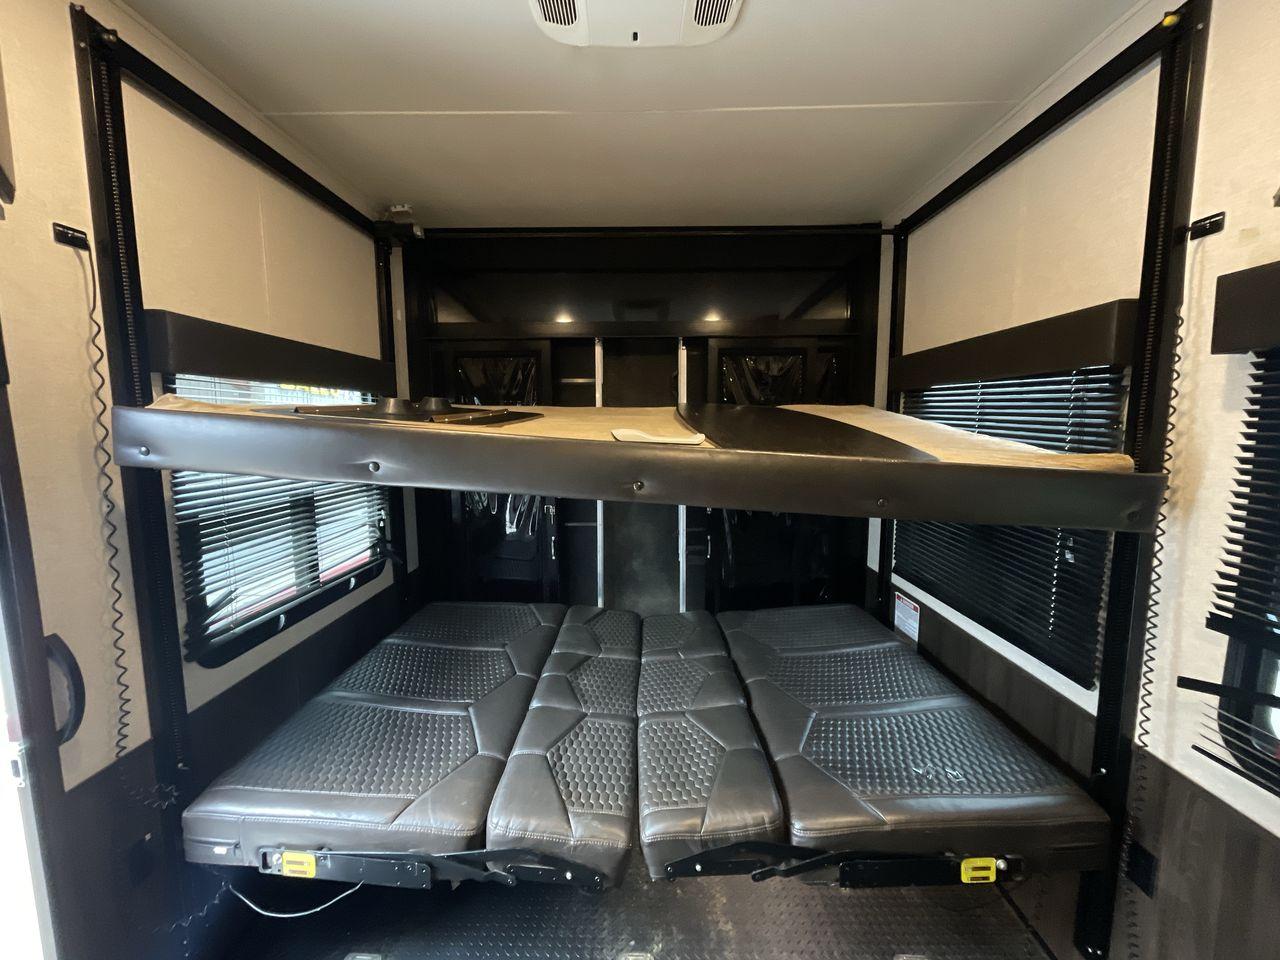 2018 GRAY JAYCO SEISMIC 4250 - (1UJCJSCV5J1) , Length: 44.92 ft. | Dry Weight: 15,570 lbs. | Gross Weight: 20,000 lbs. | Slides: 3 transmission, located at 4319 N Main St, Cleburne, TX, 76033, (817) 678-5133, 32.385960, -97.391212 - Set out to the great outdoors in this 2018 Jayco Seismic 4250 and enjoy all the amenities it has to offer! This toy hauler measures just a bit under 45 ft. in length and 13.32 ft. in height, providing great space and comfort. It has a dry weight of 15,570 lbs. and a GVWR of 20,000 lbs. It also comes - Photo #25